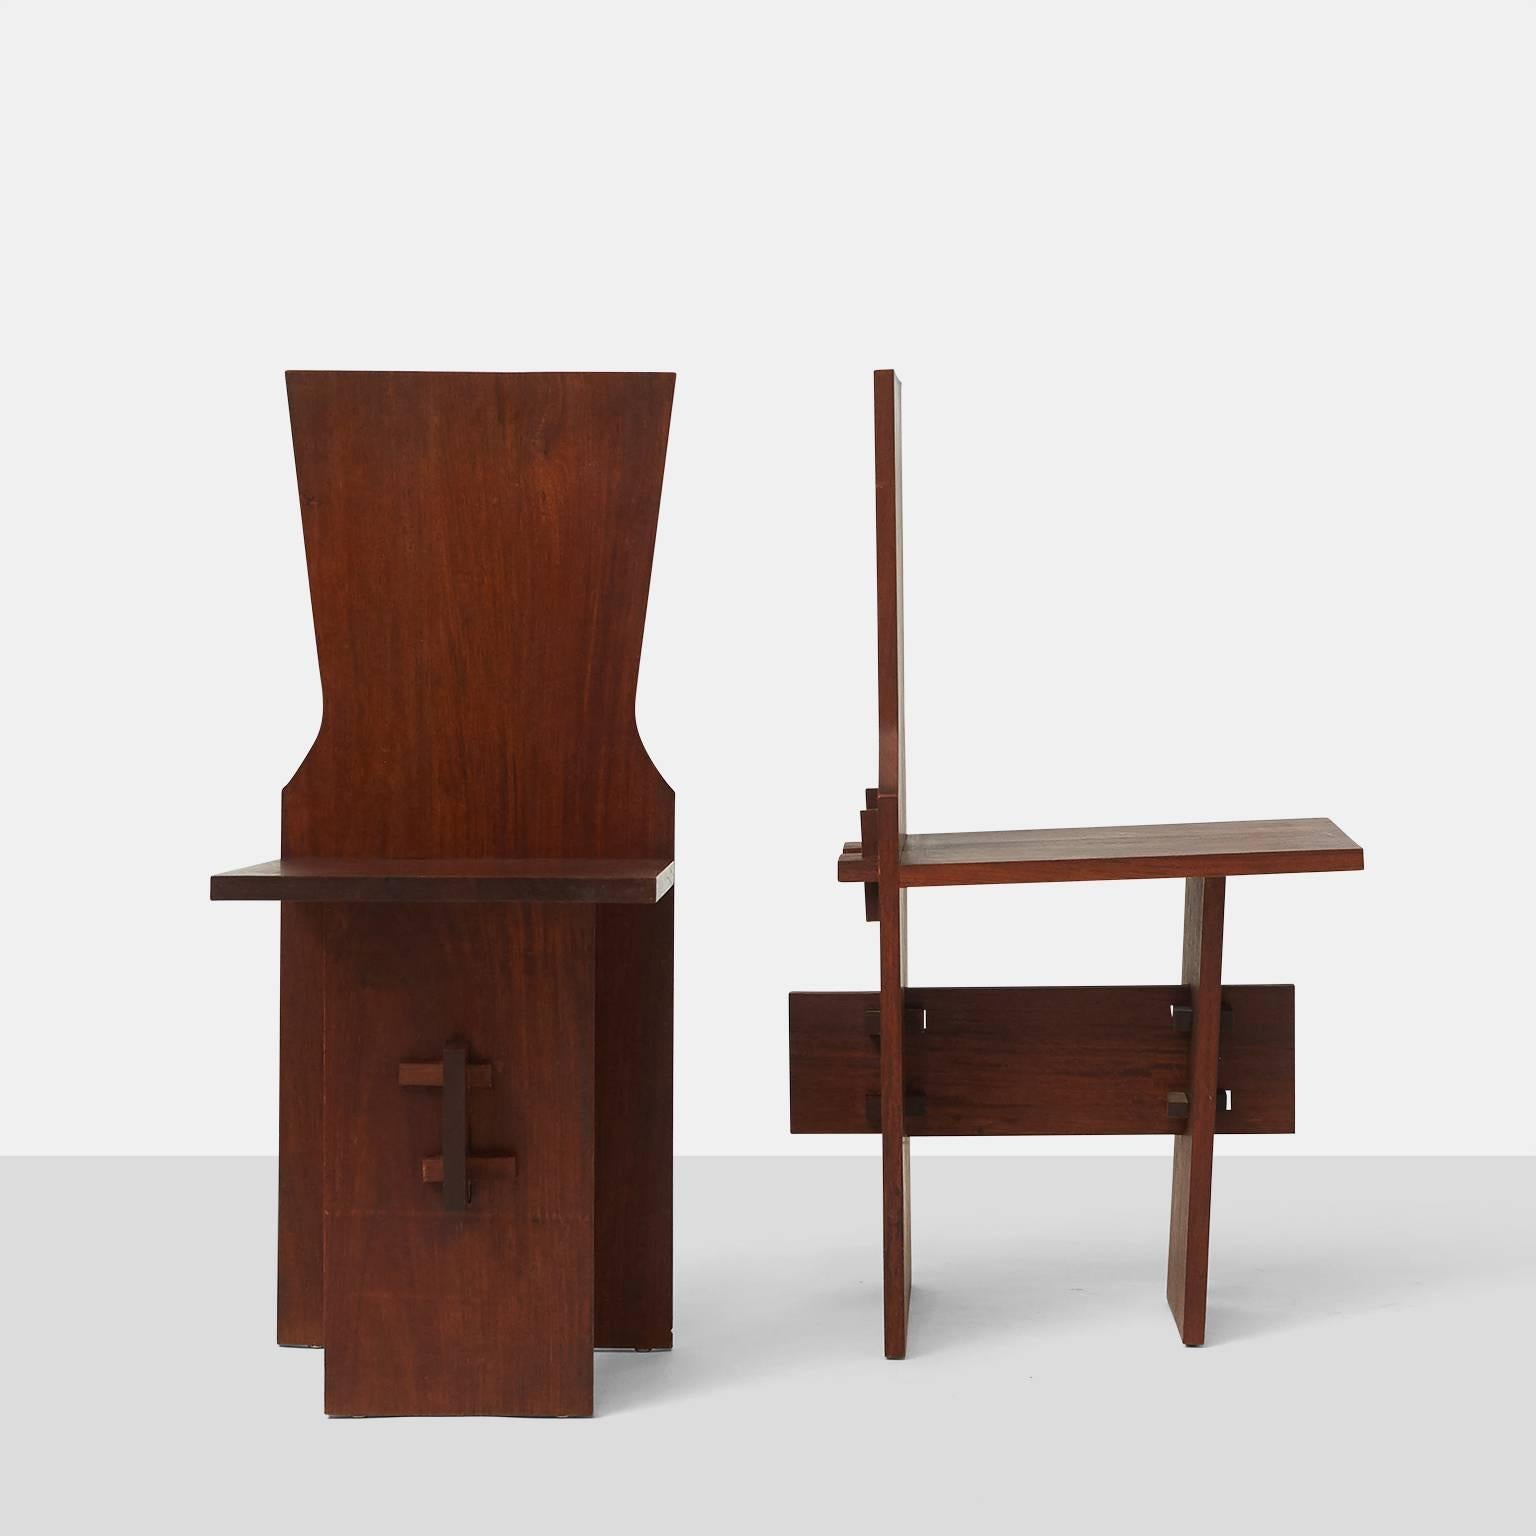 Pair of side chairs by Daniel B.H. Liebermann
A pair of side chairs with incredible detailing by Harvard trained architect Daniel B.H. Liebermann. The chairs have no glue, nails, nor tacks and are held together by the Japanese inspired joinery.